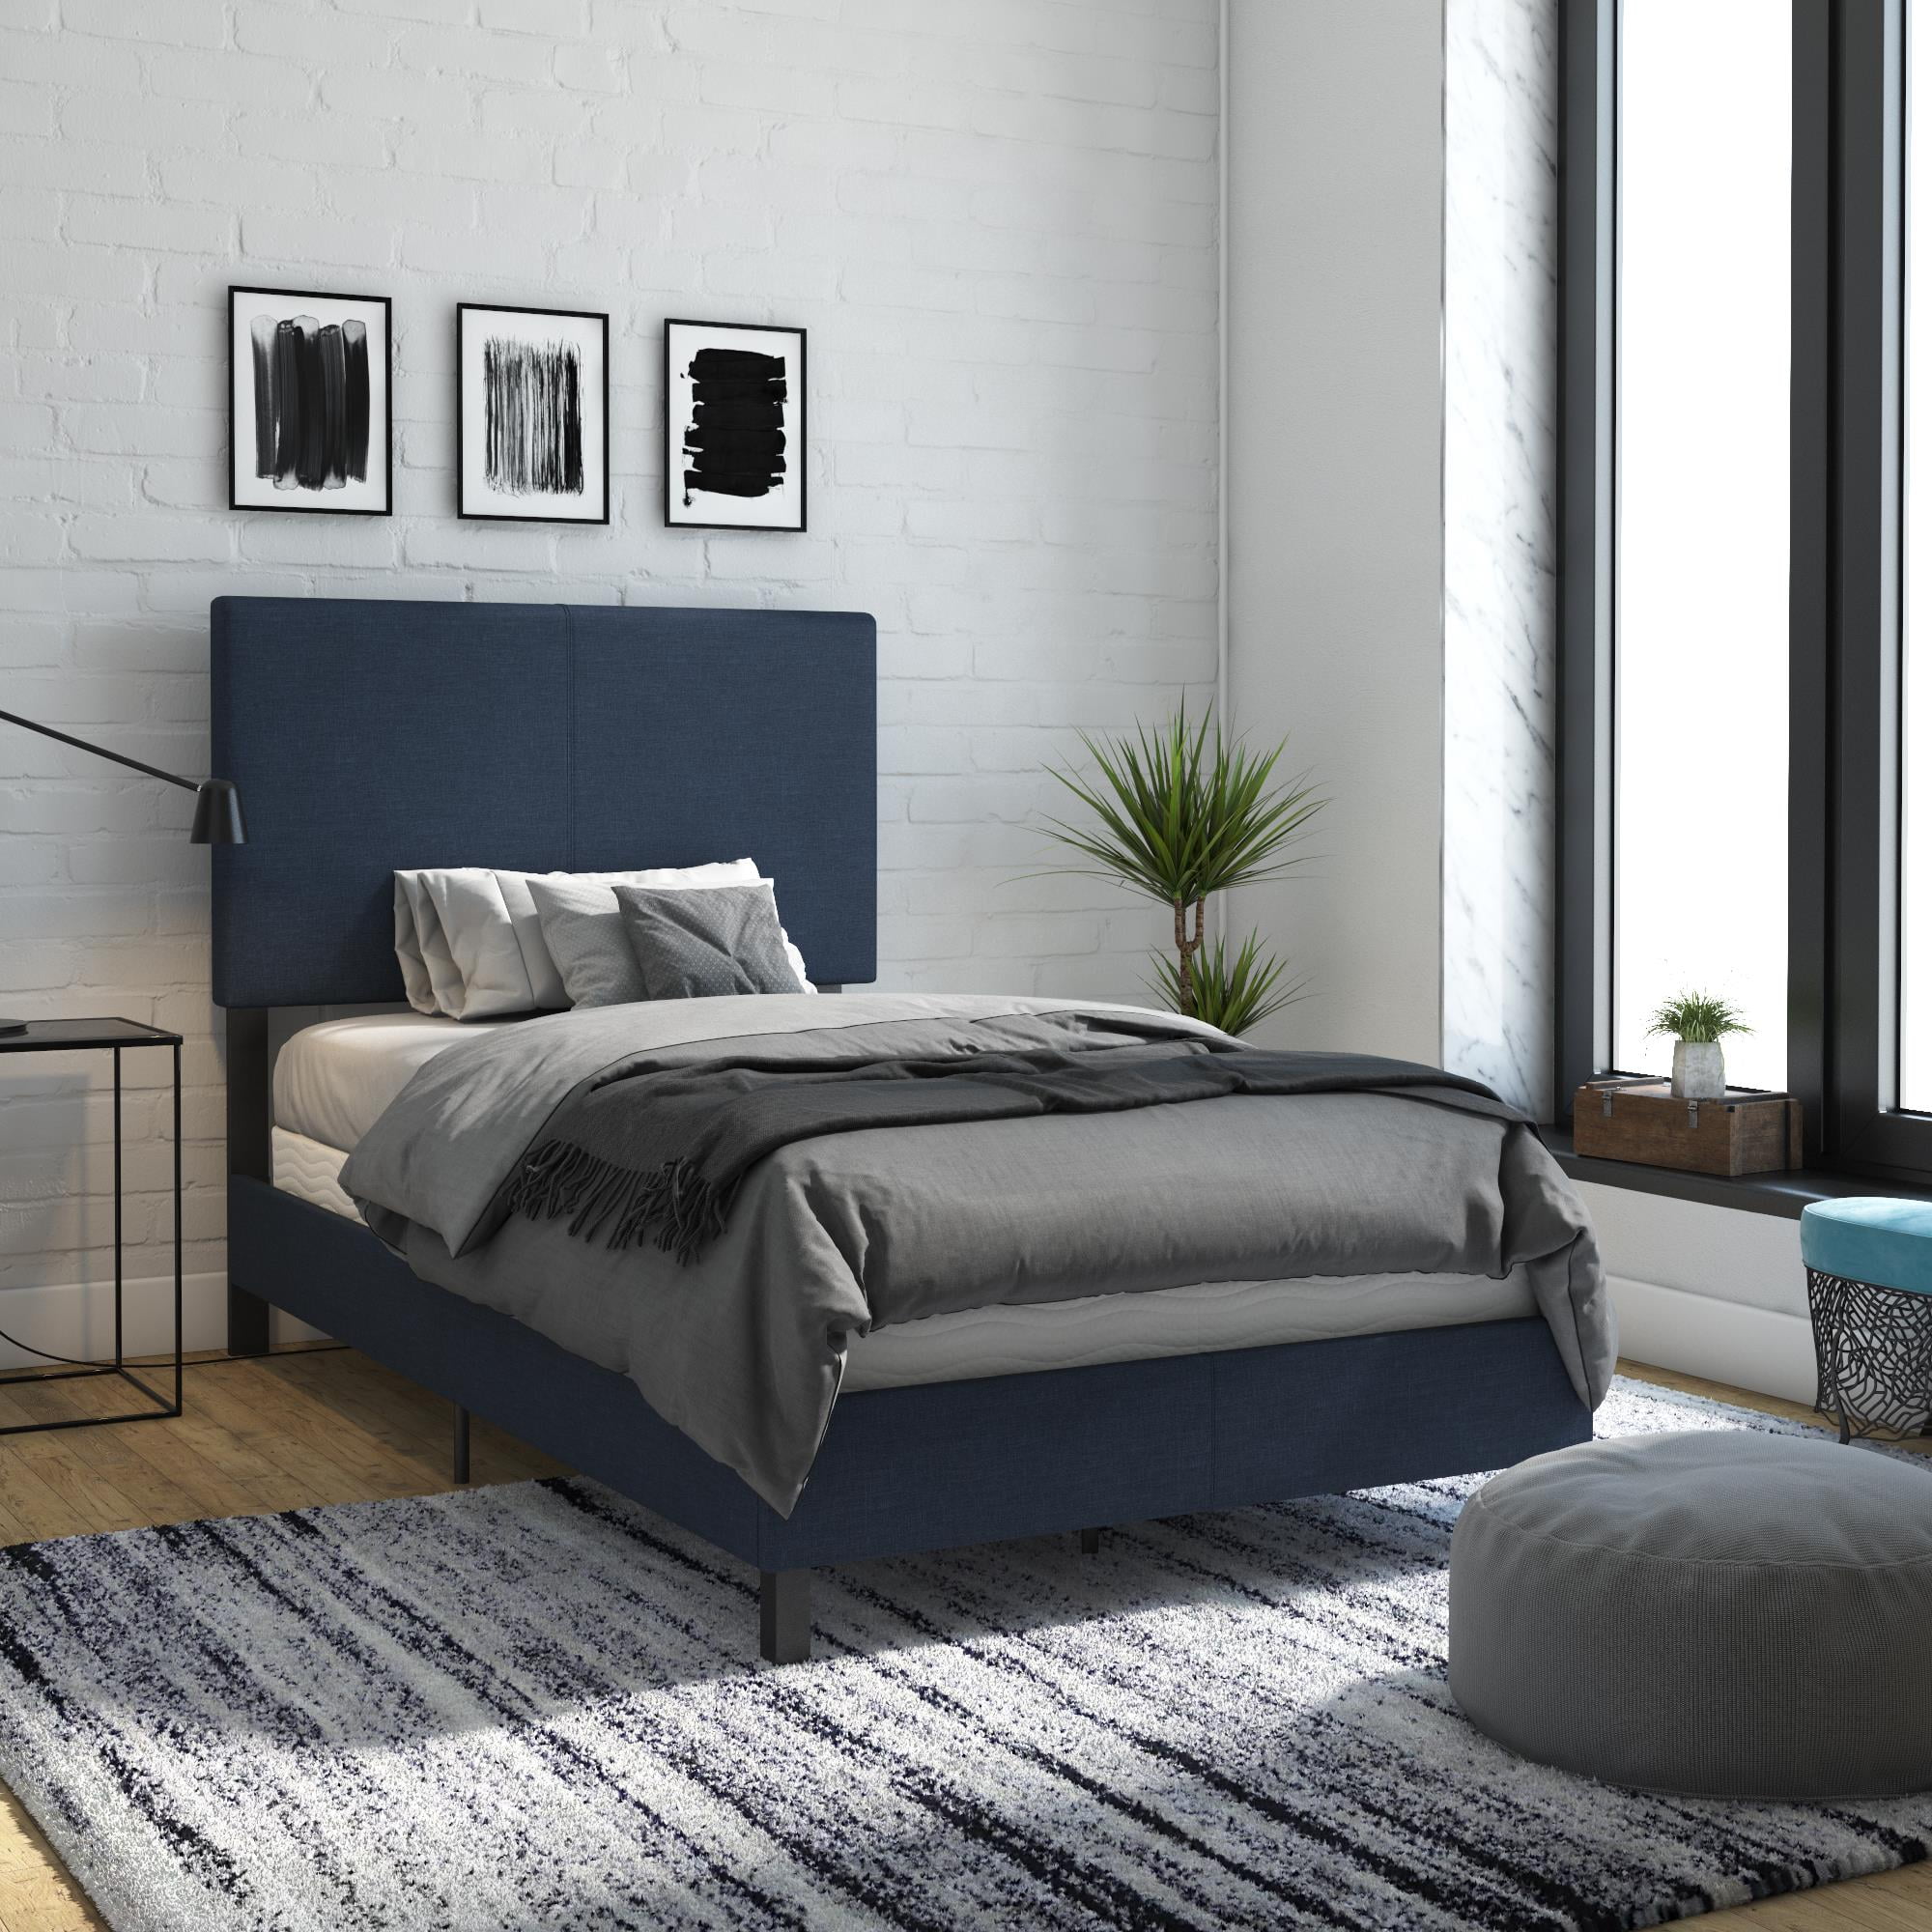 Desert Fields Janford Upholstered Bed with Headboard, Twin, Navy Blue ...